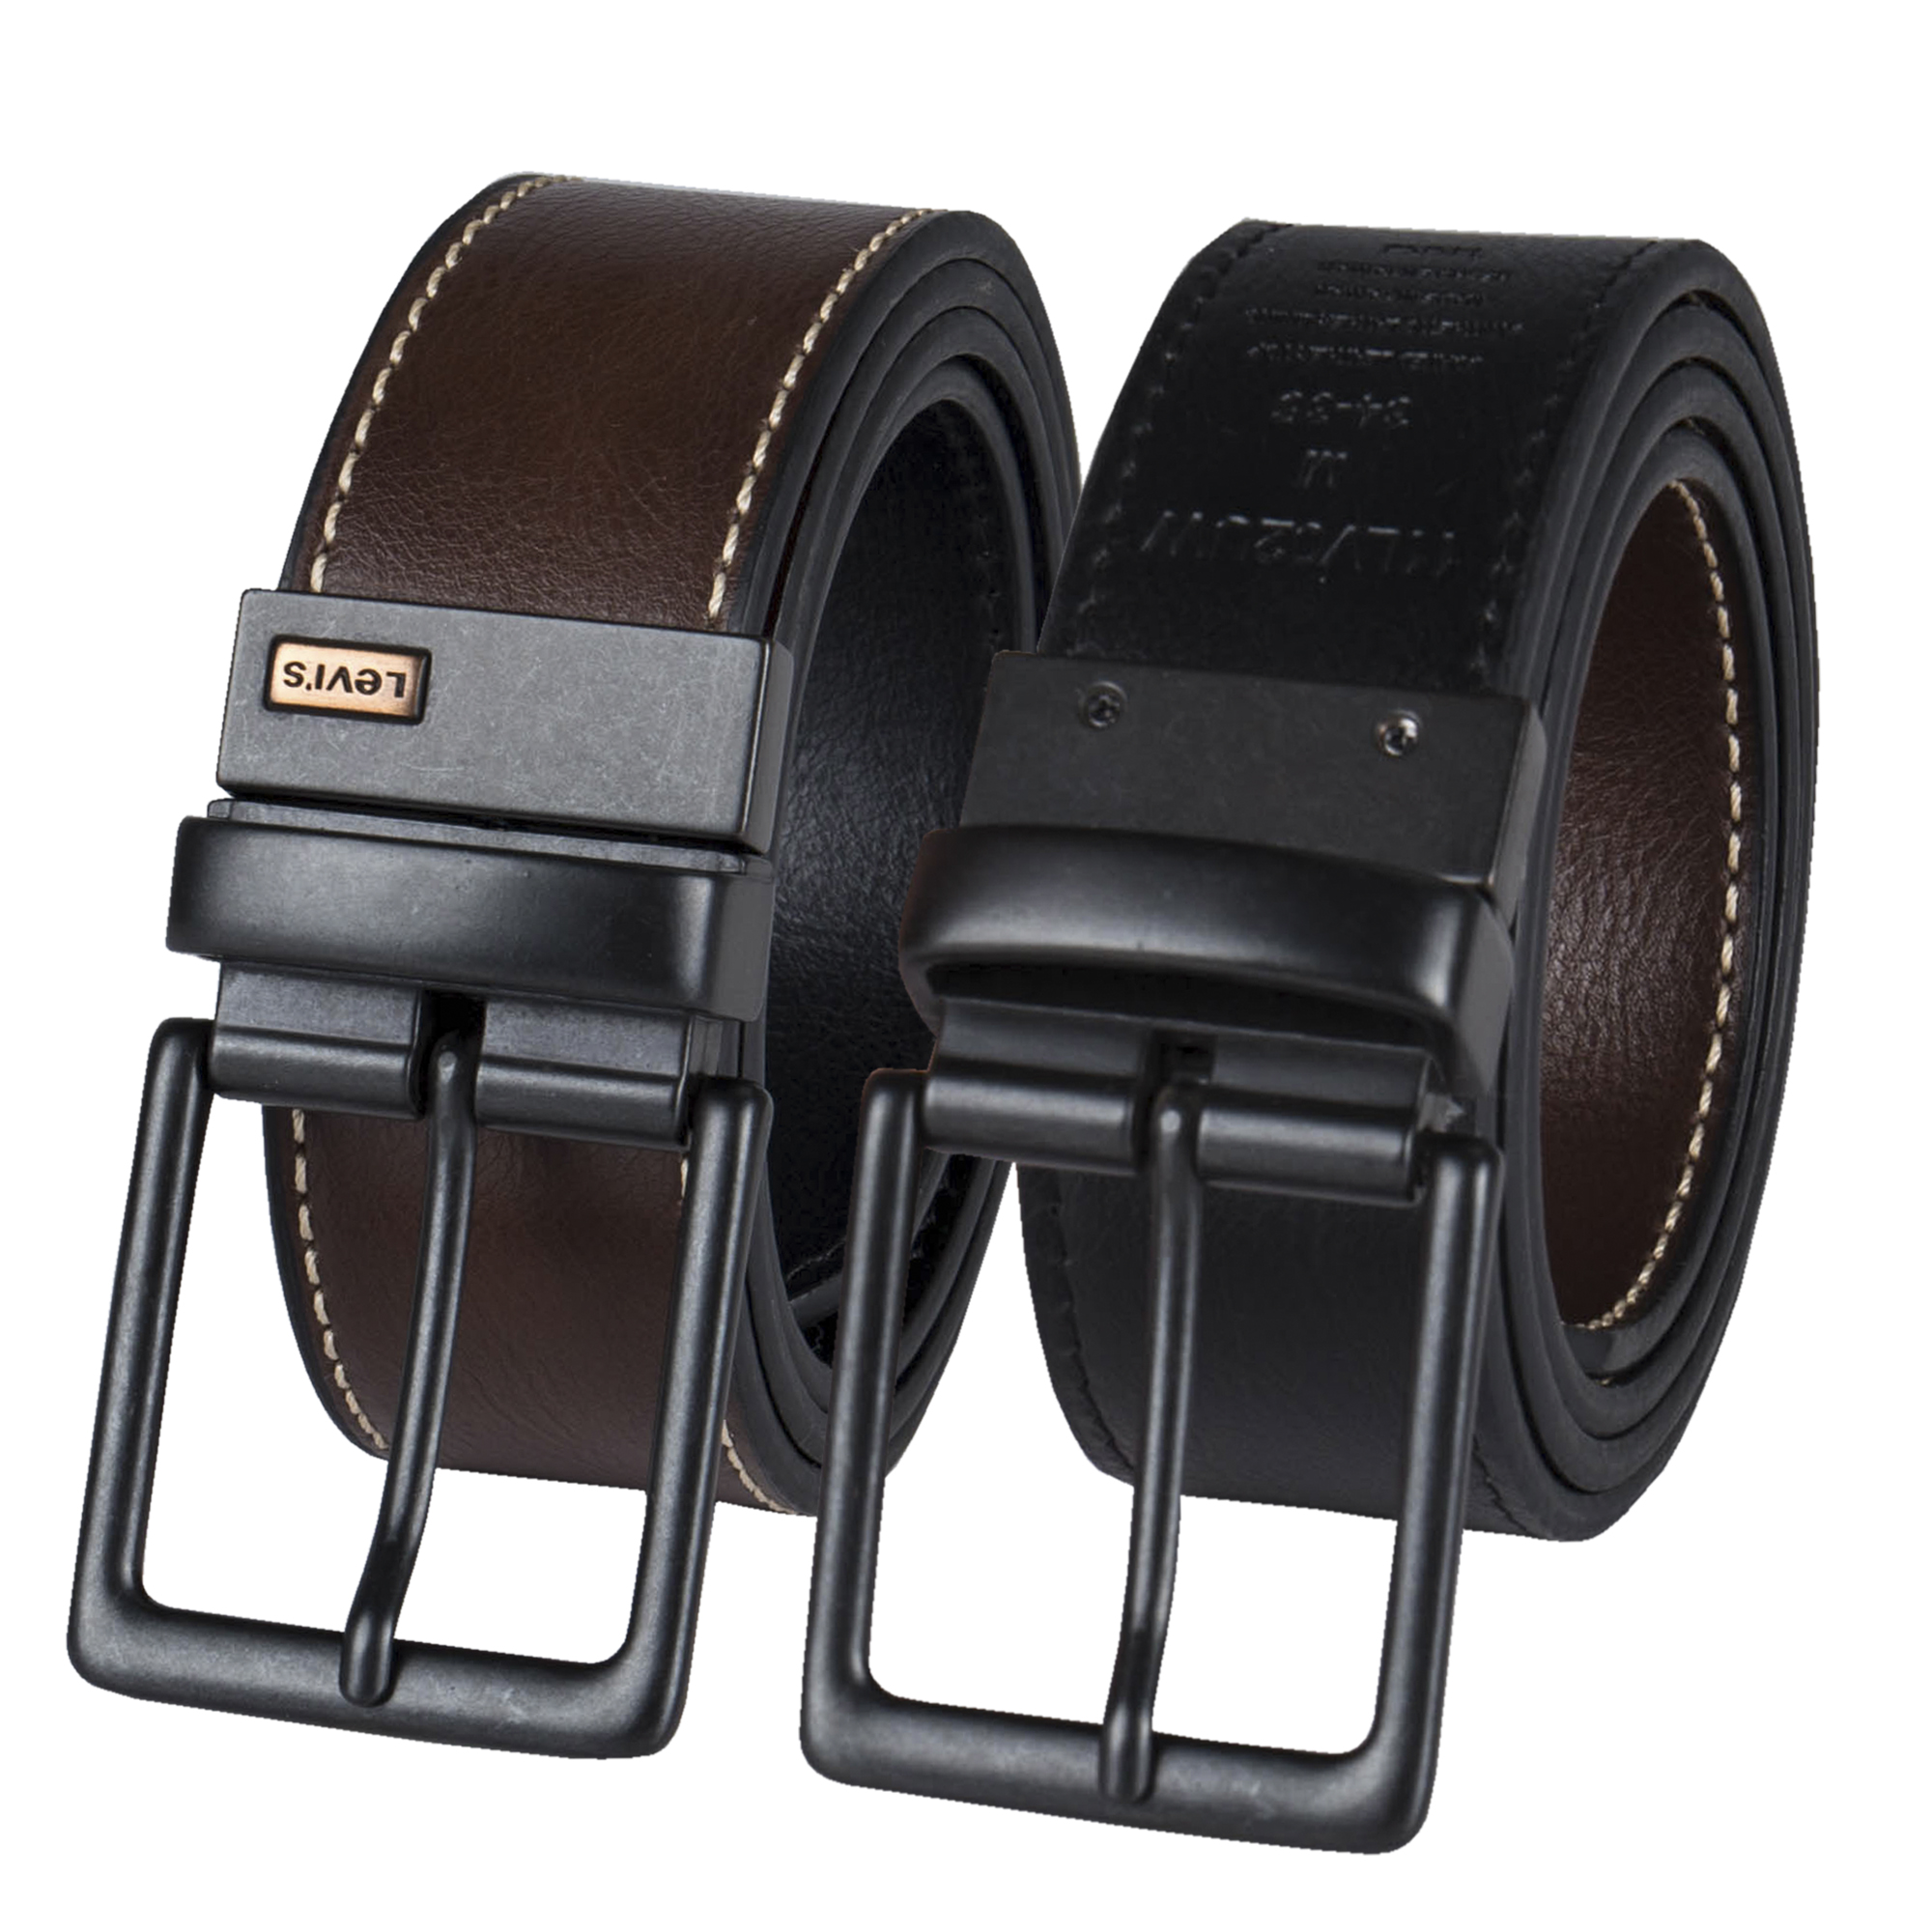 Levi's Men's Two-in-One Reversible Casual Jean Belt - image 5 of 7